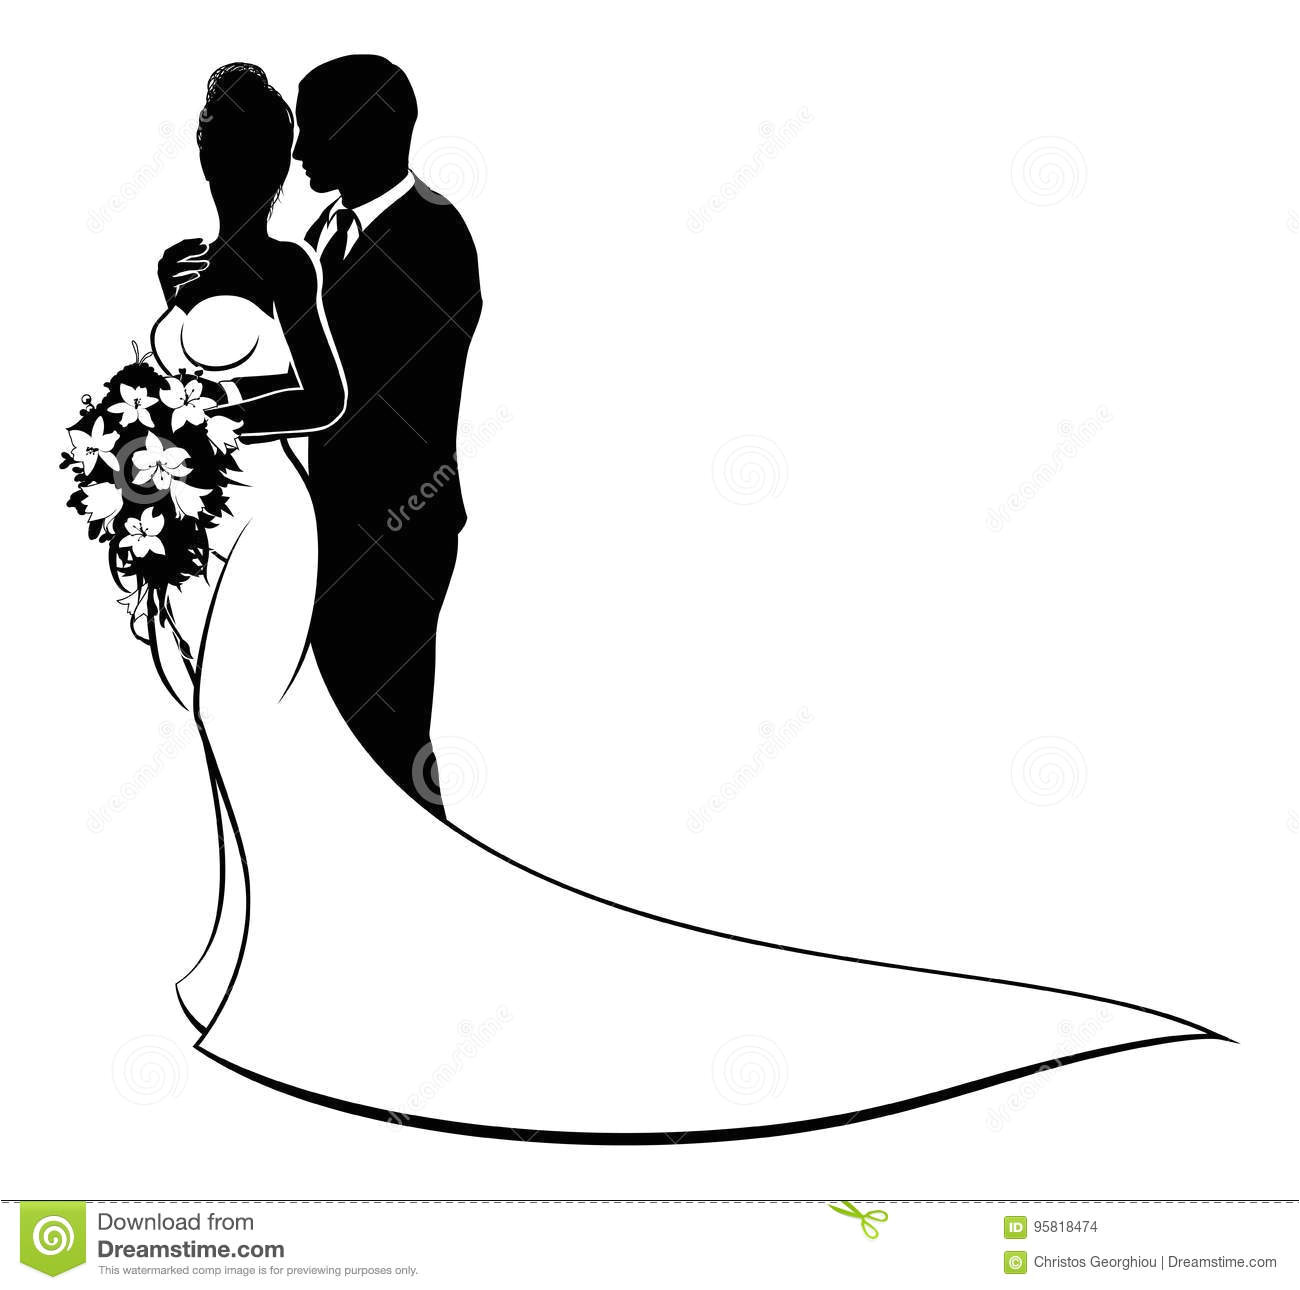 bride groom husband wife wedding silhouette concept couple white bridal dress gown holding floral bouquet 95818474 jpg